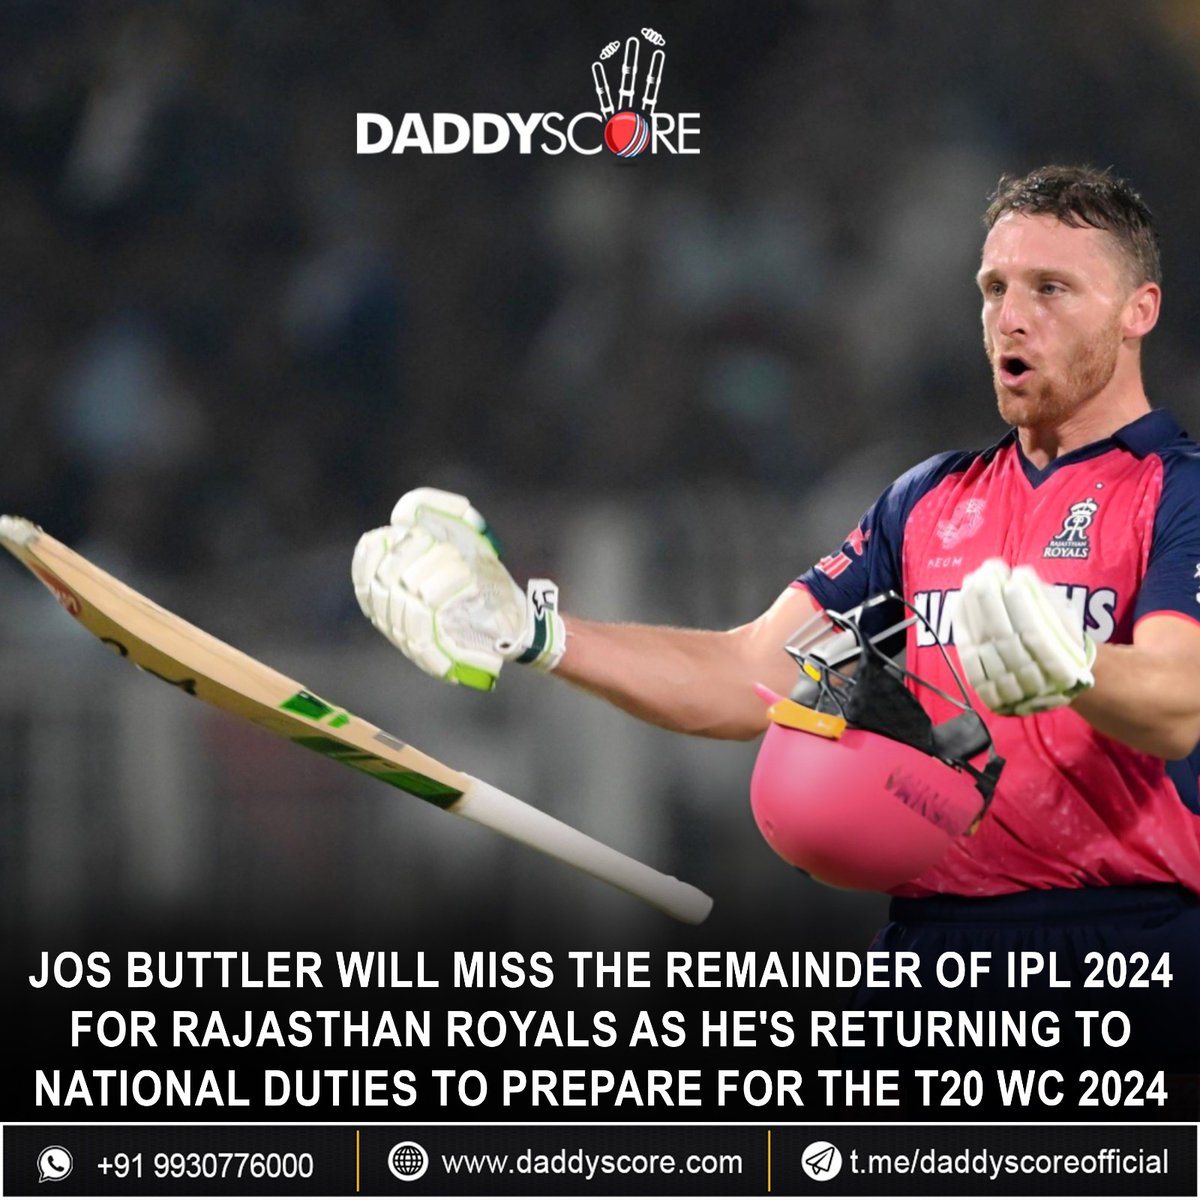 🚨 𝗕𝗶𝗴 𝗕𝗿𝗲𝗮𝗸𝗶𝗻𝗴 🚨 Jos Buttler will miss the remainder of IPL 2024 for Rajasthan Royals as he's returning to national duties to prepare for the T20 WC 2024!